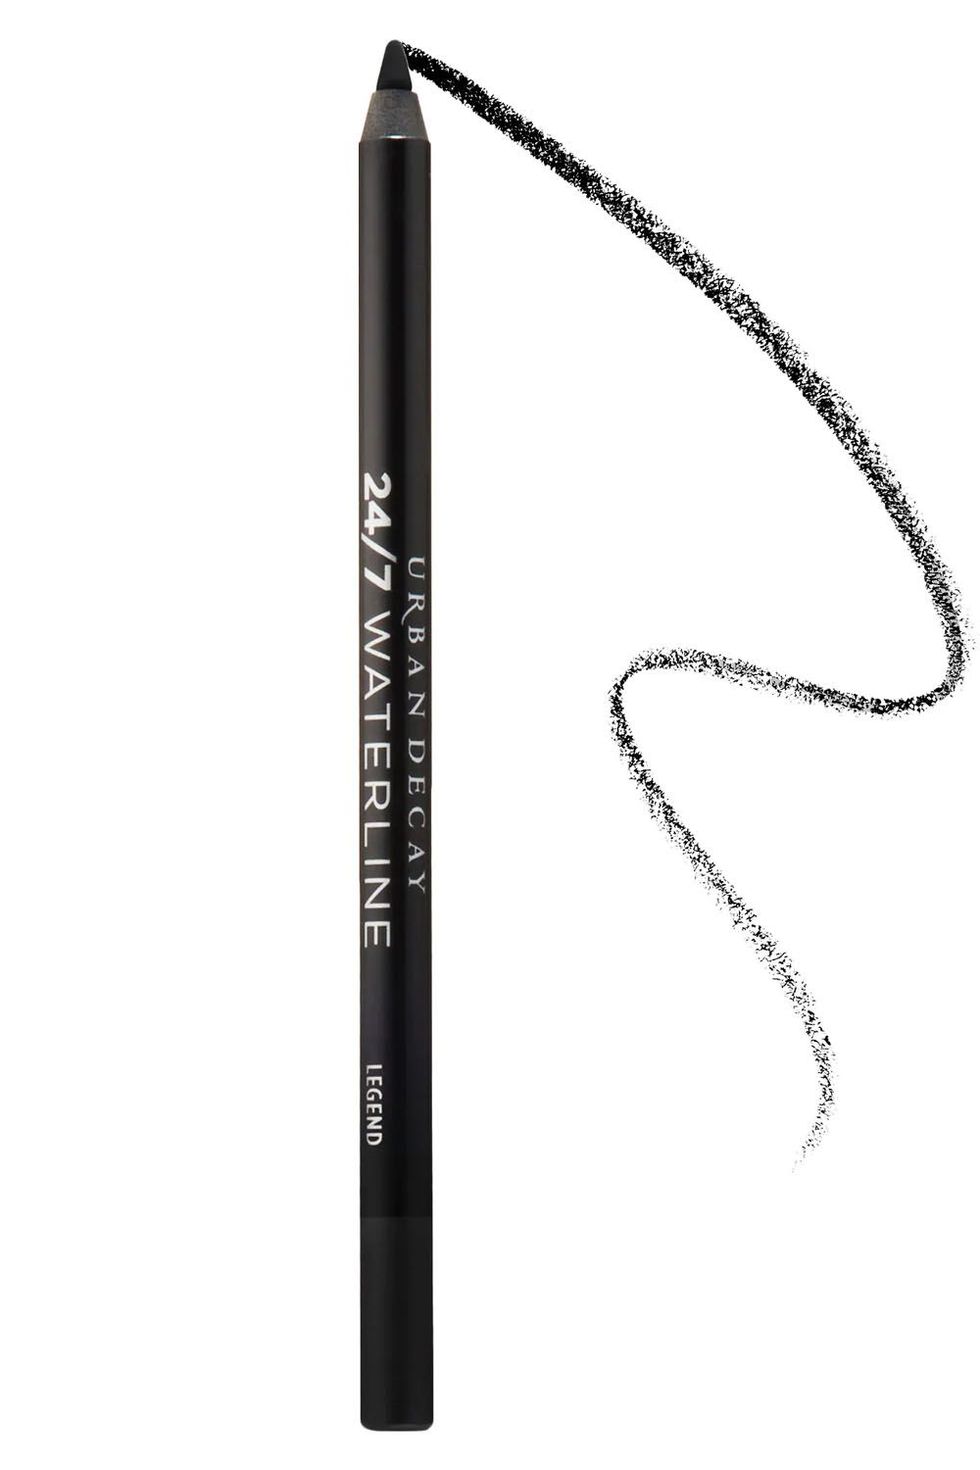 10 Eyeliners for That Won't Run or in 2022